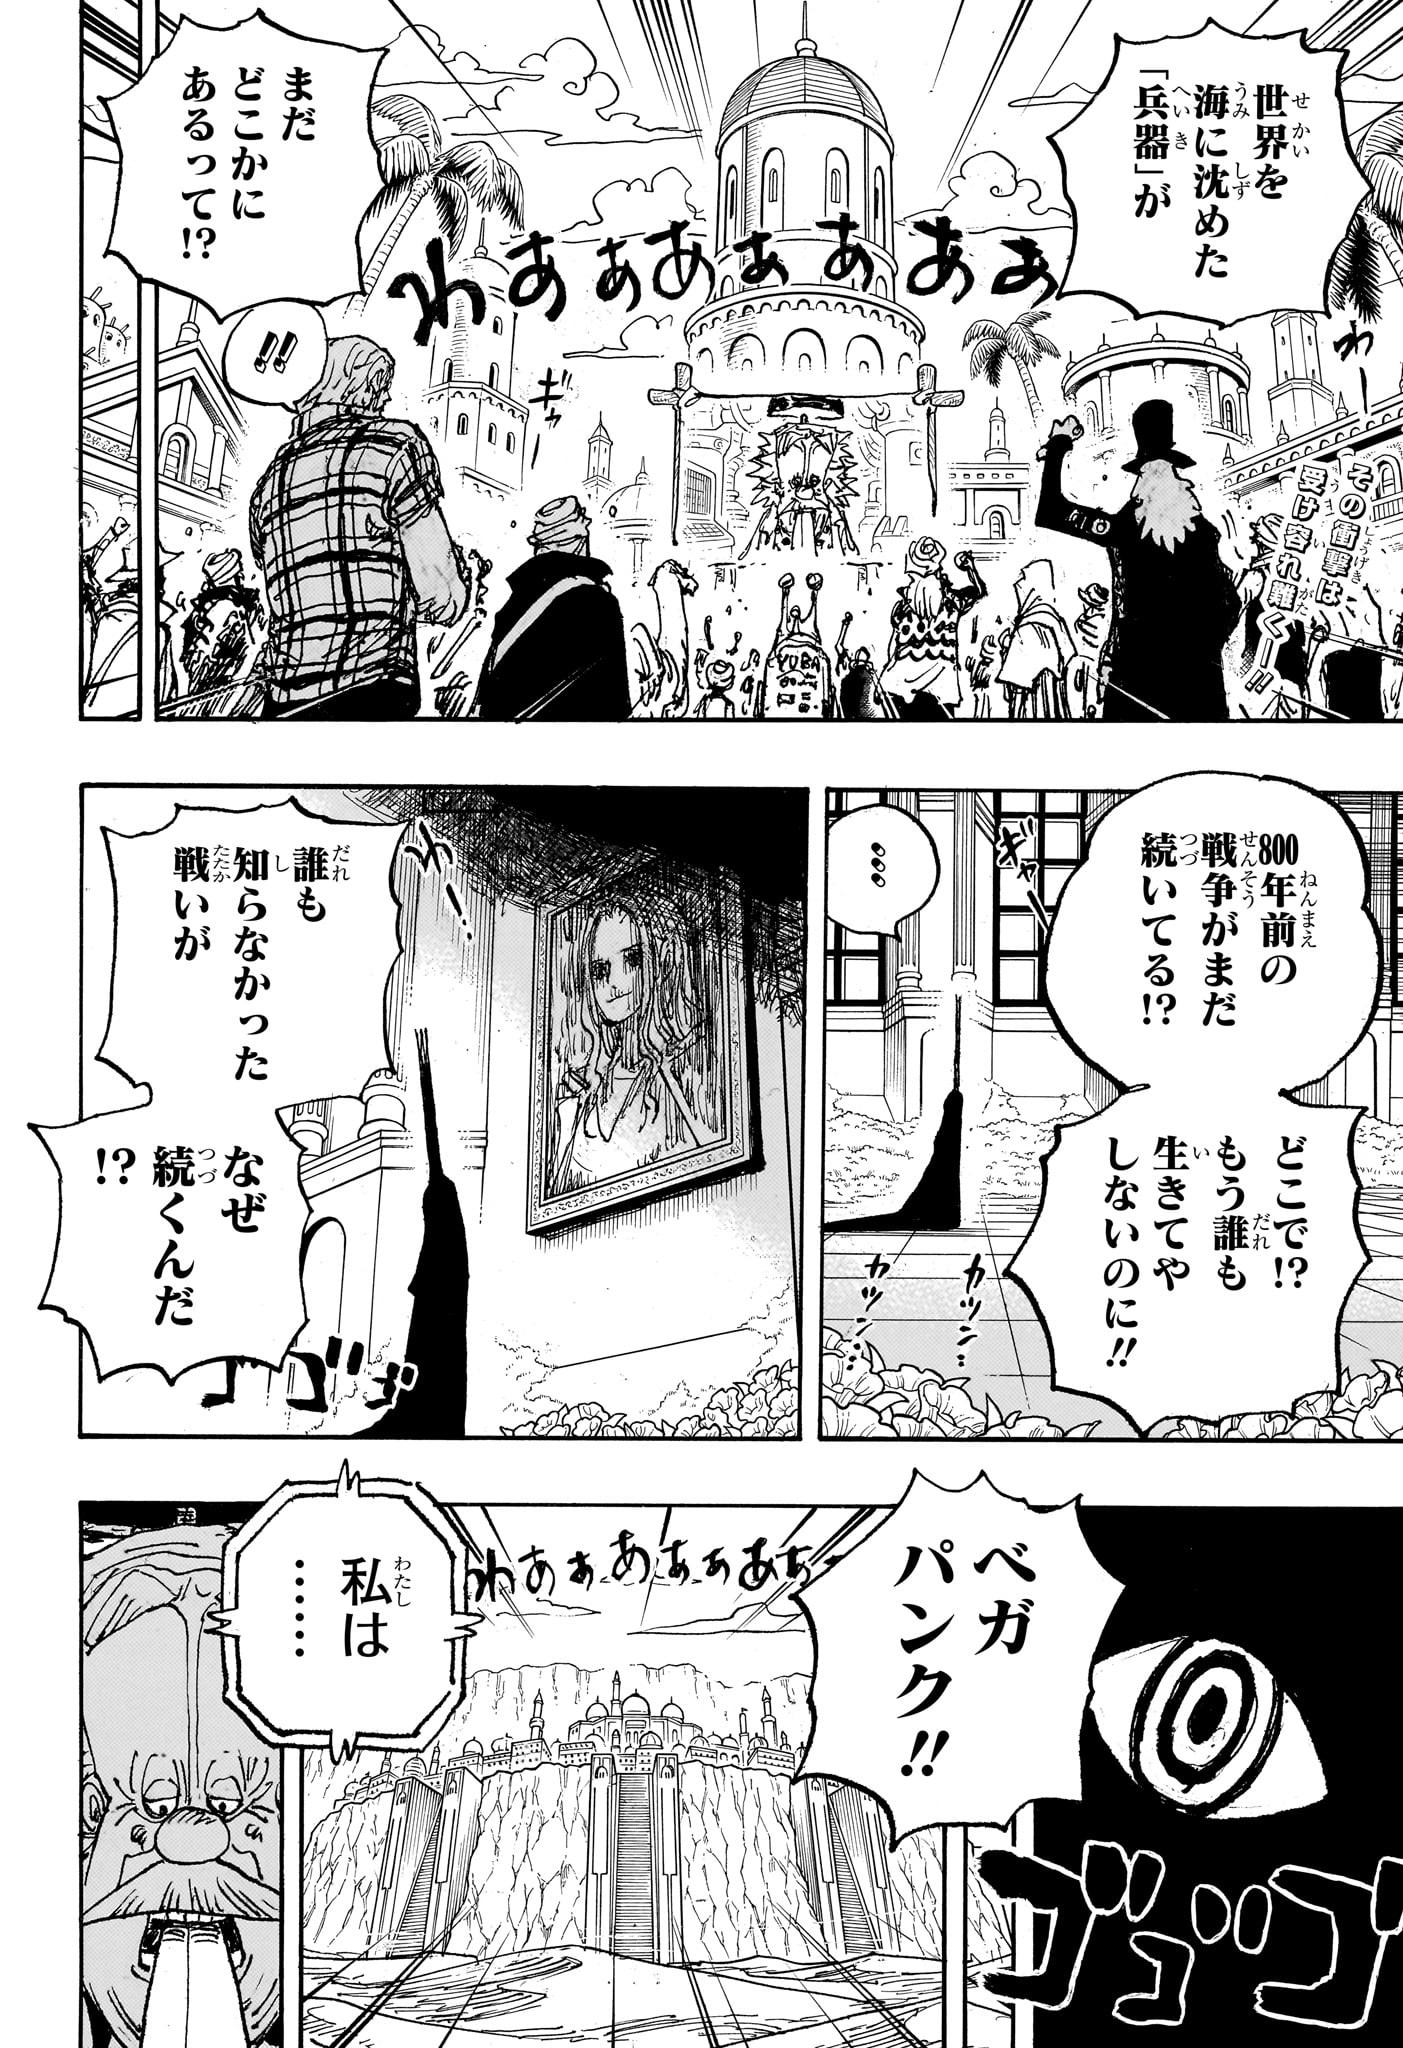 One Piece - Chapter 1116 - Page 2